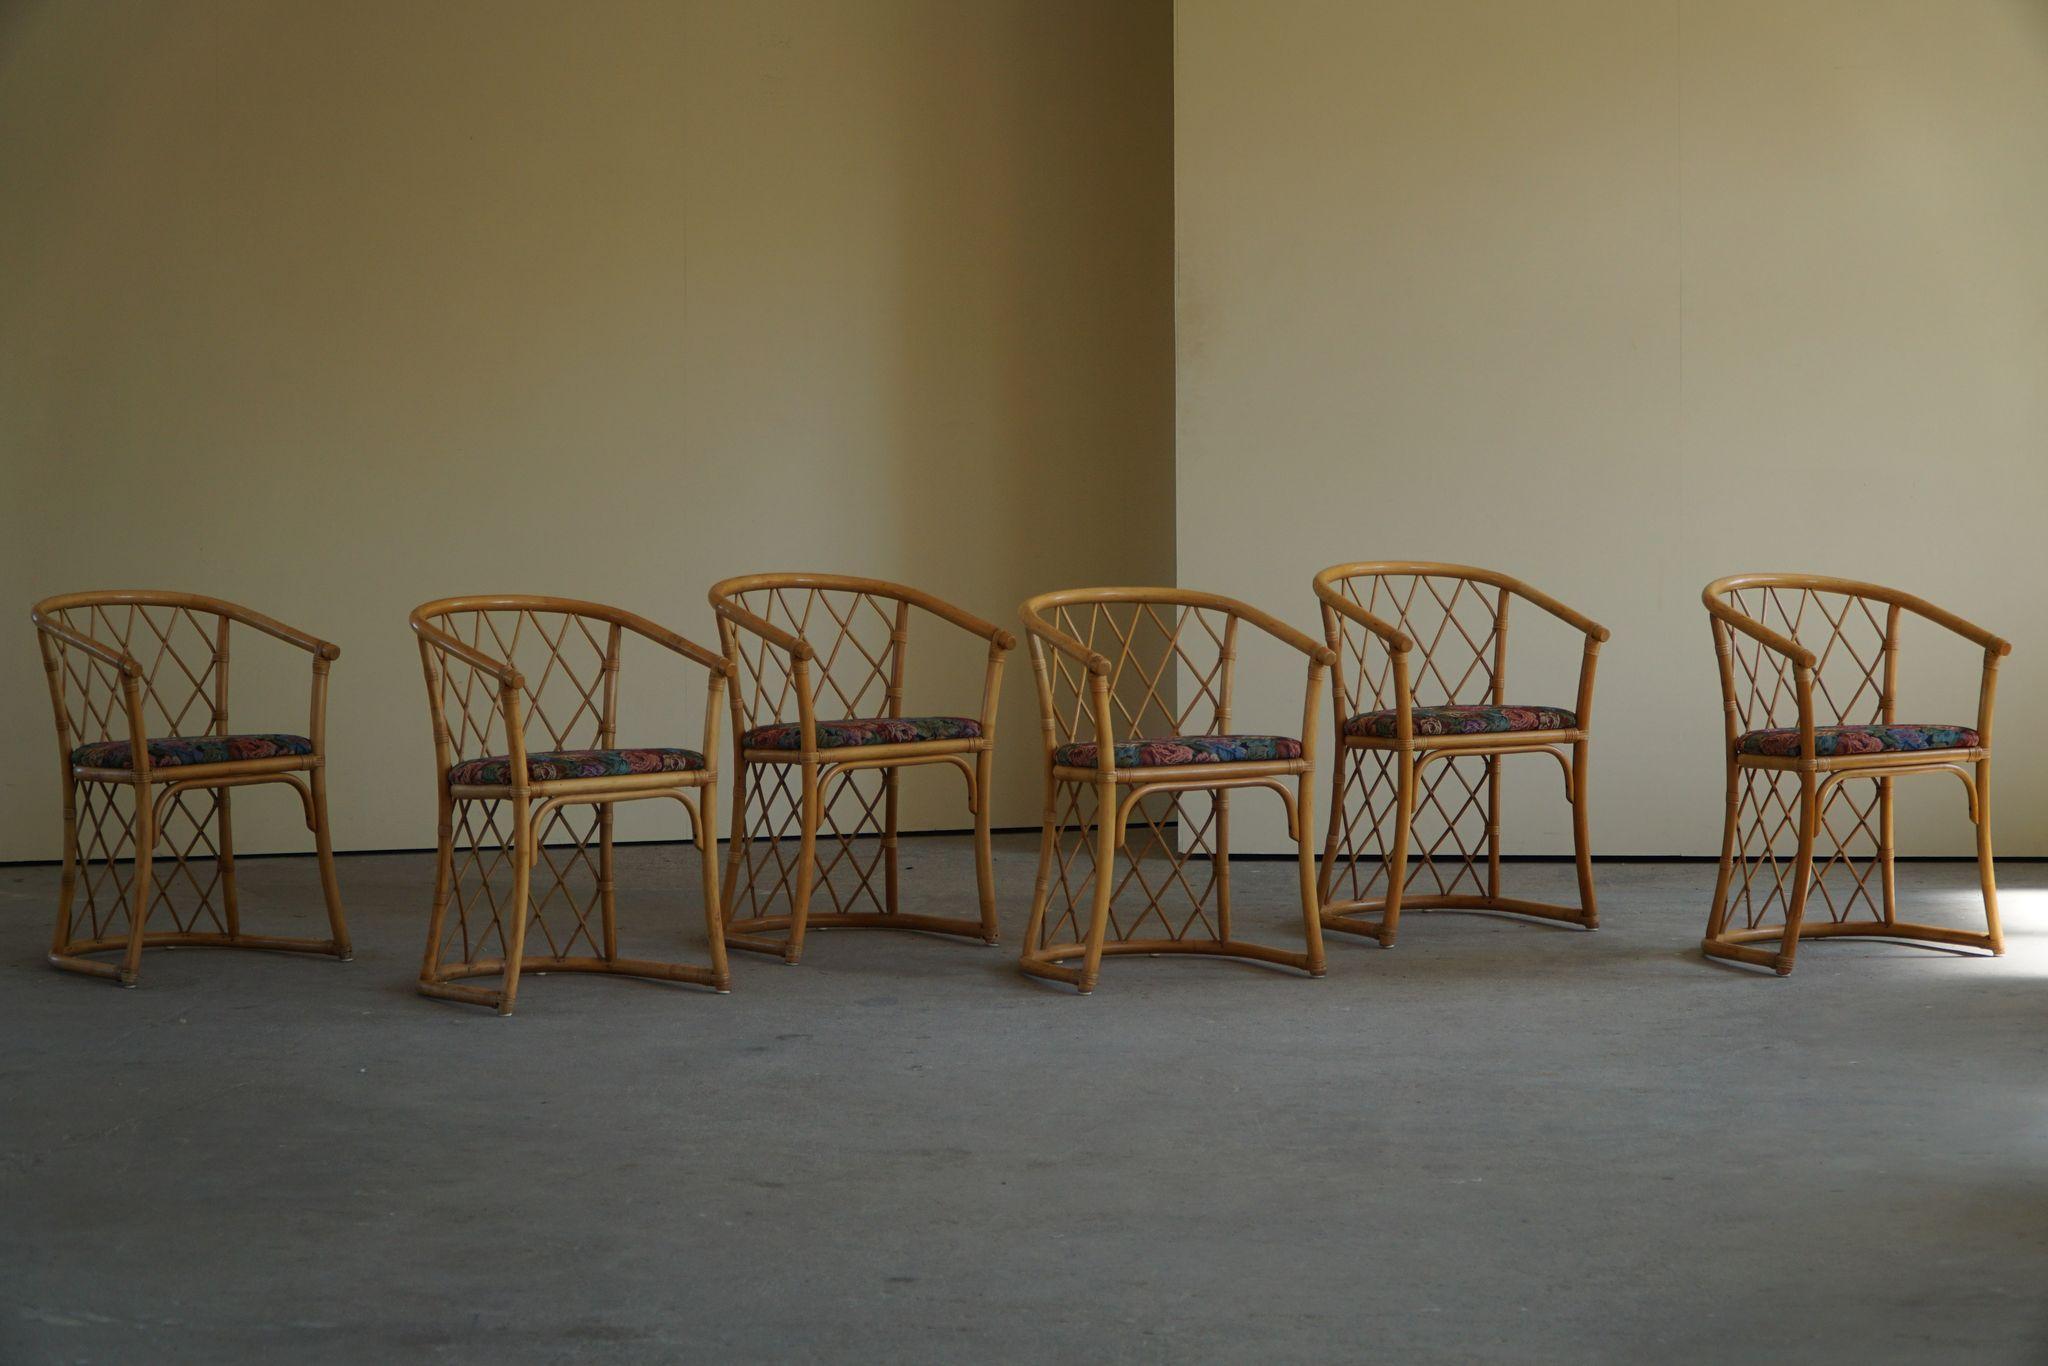 Set of 6 Sculptural Vintage Bamboo Dining Chairs, Danish Modern, Made in 1960s For Sale 1